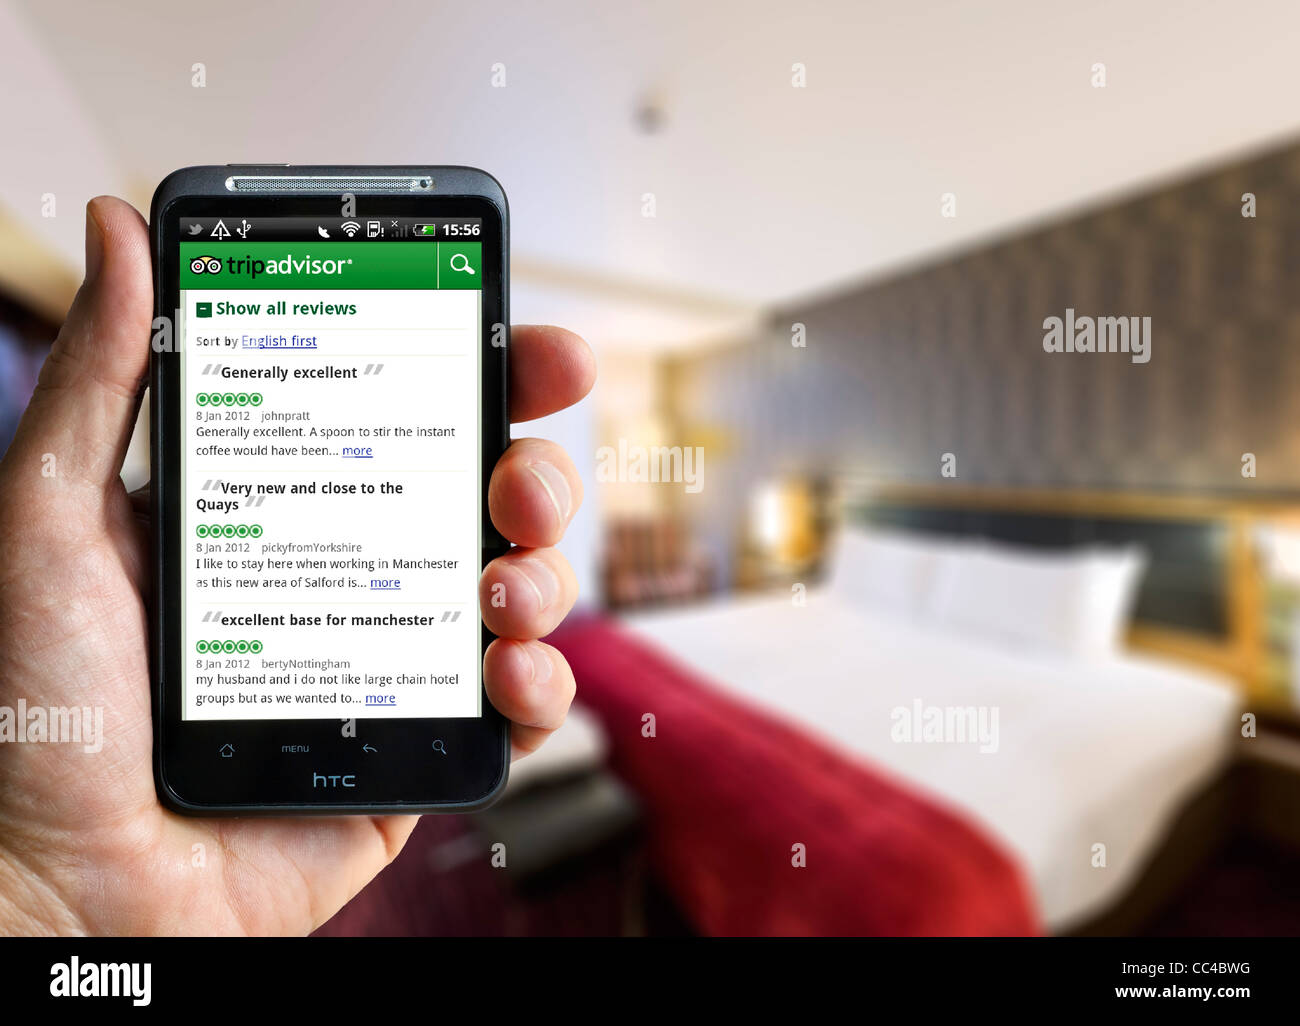 TripAdvisor app on an HTC smartphone showing room interior and review for Holiday Inn MediacityUK Stock Photo